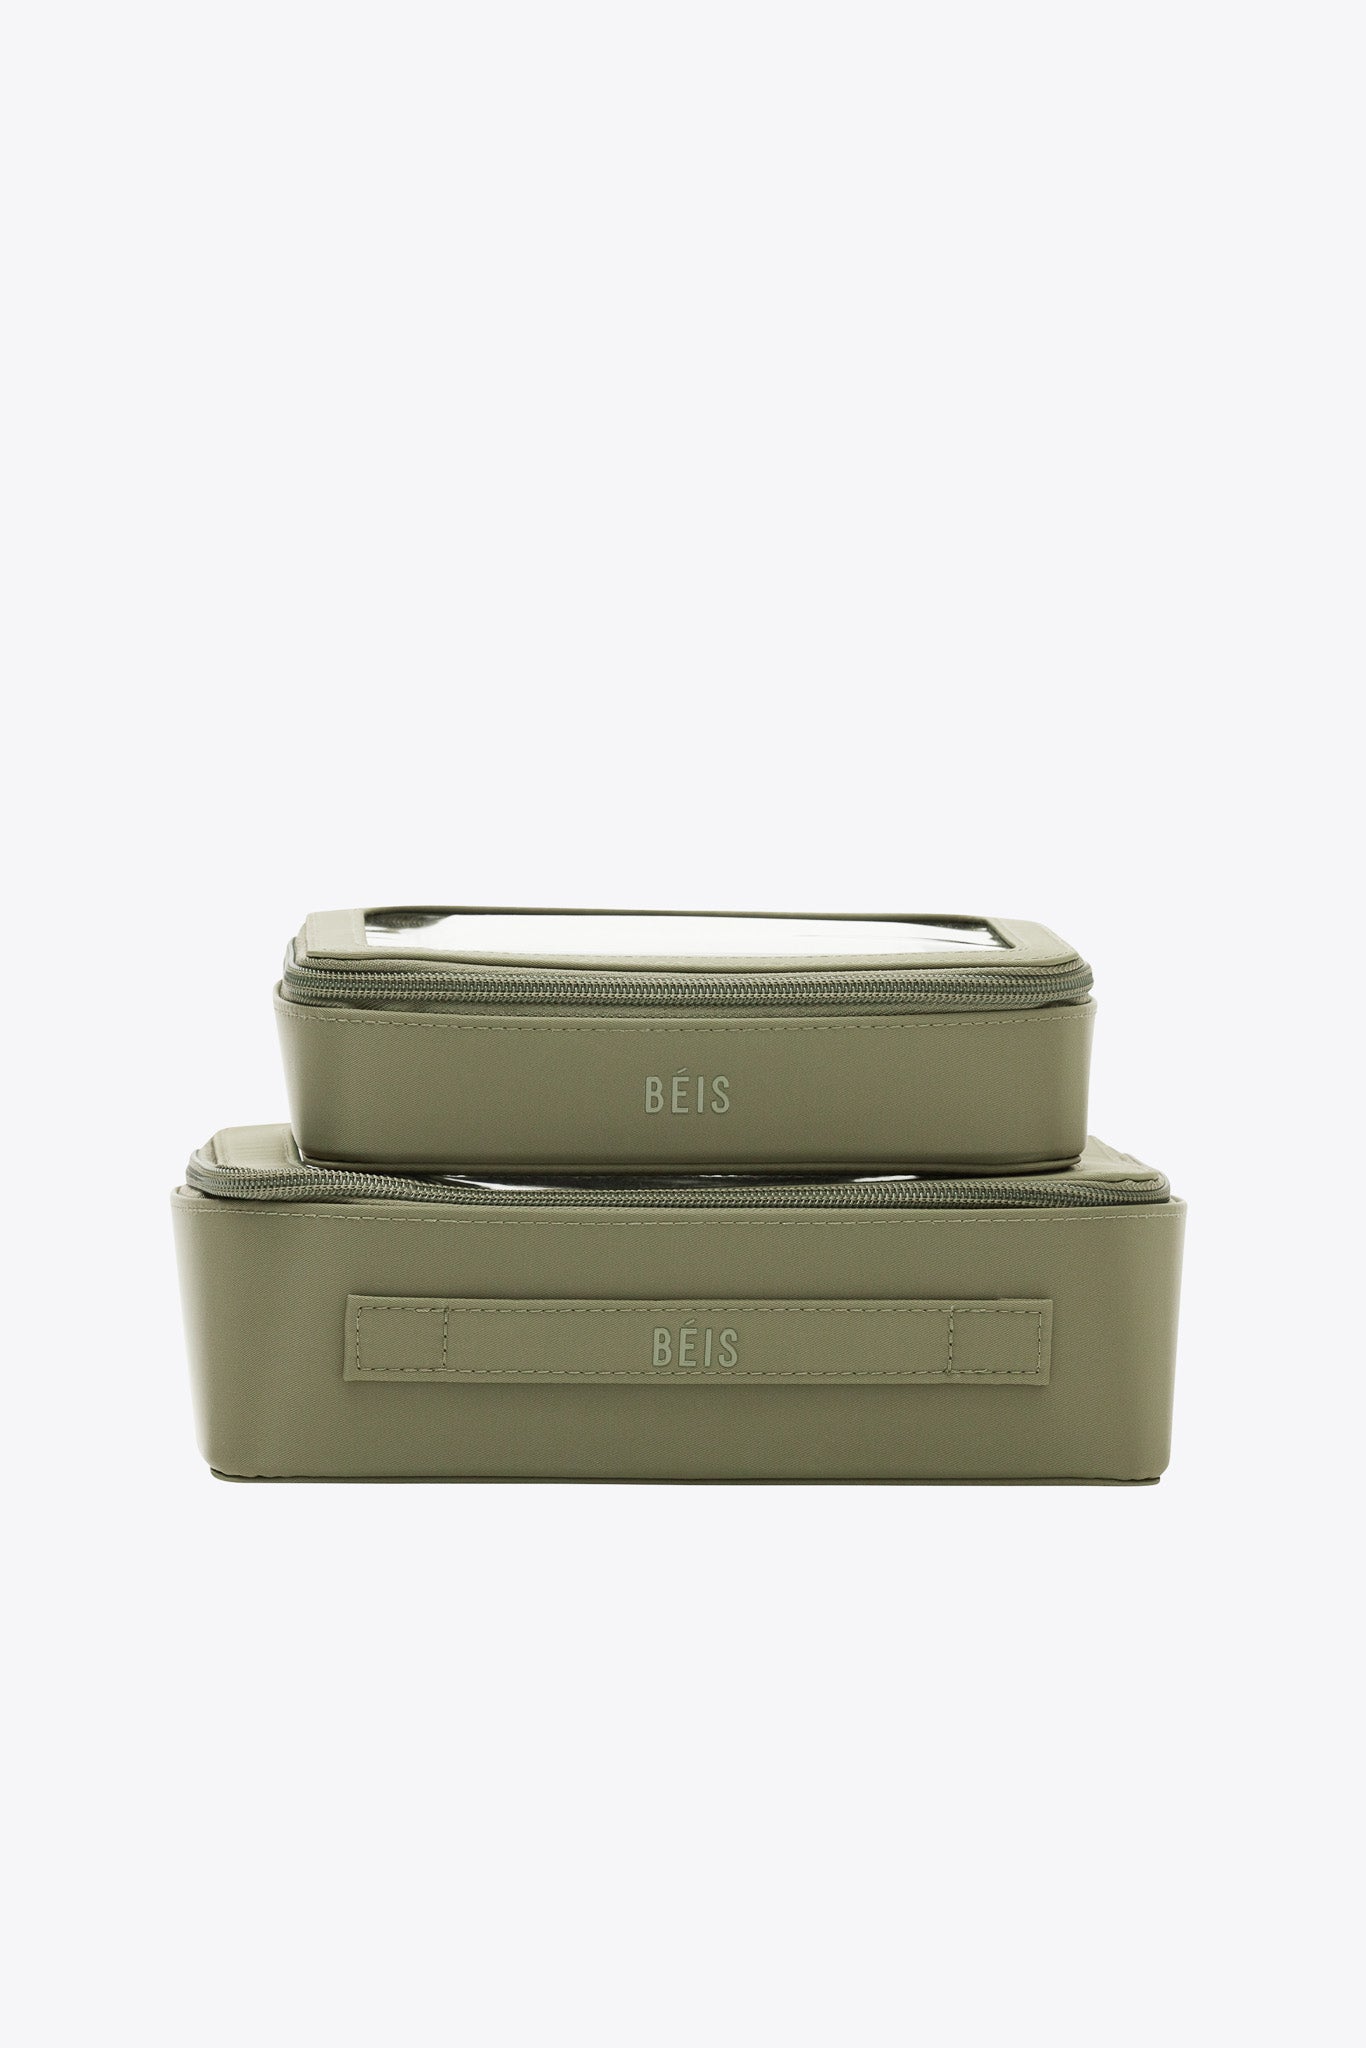 The In Flight Cosmetic Set in Olive